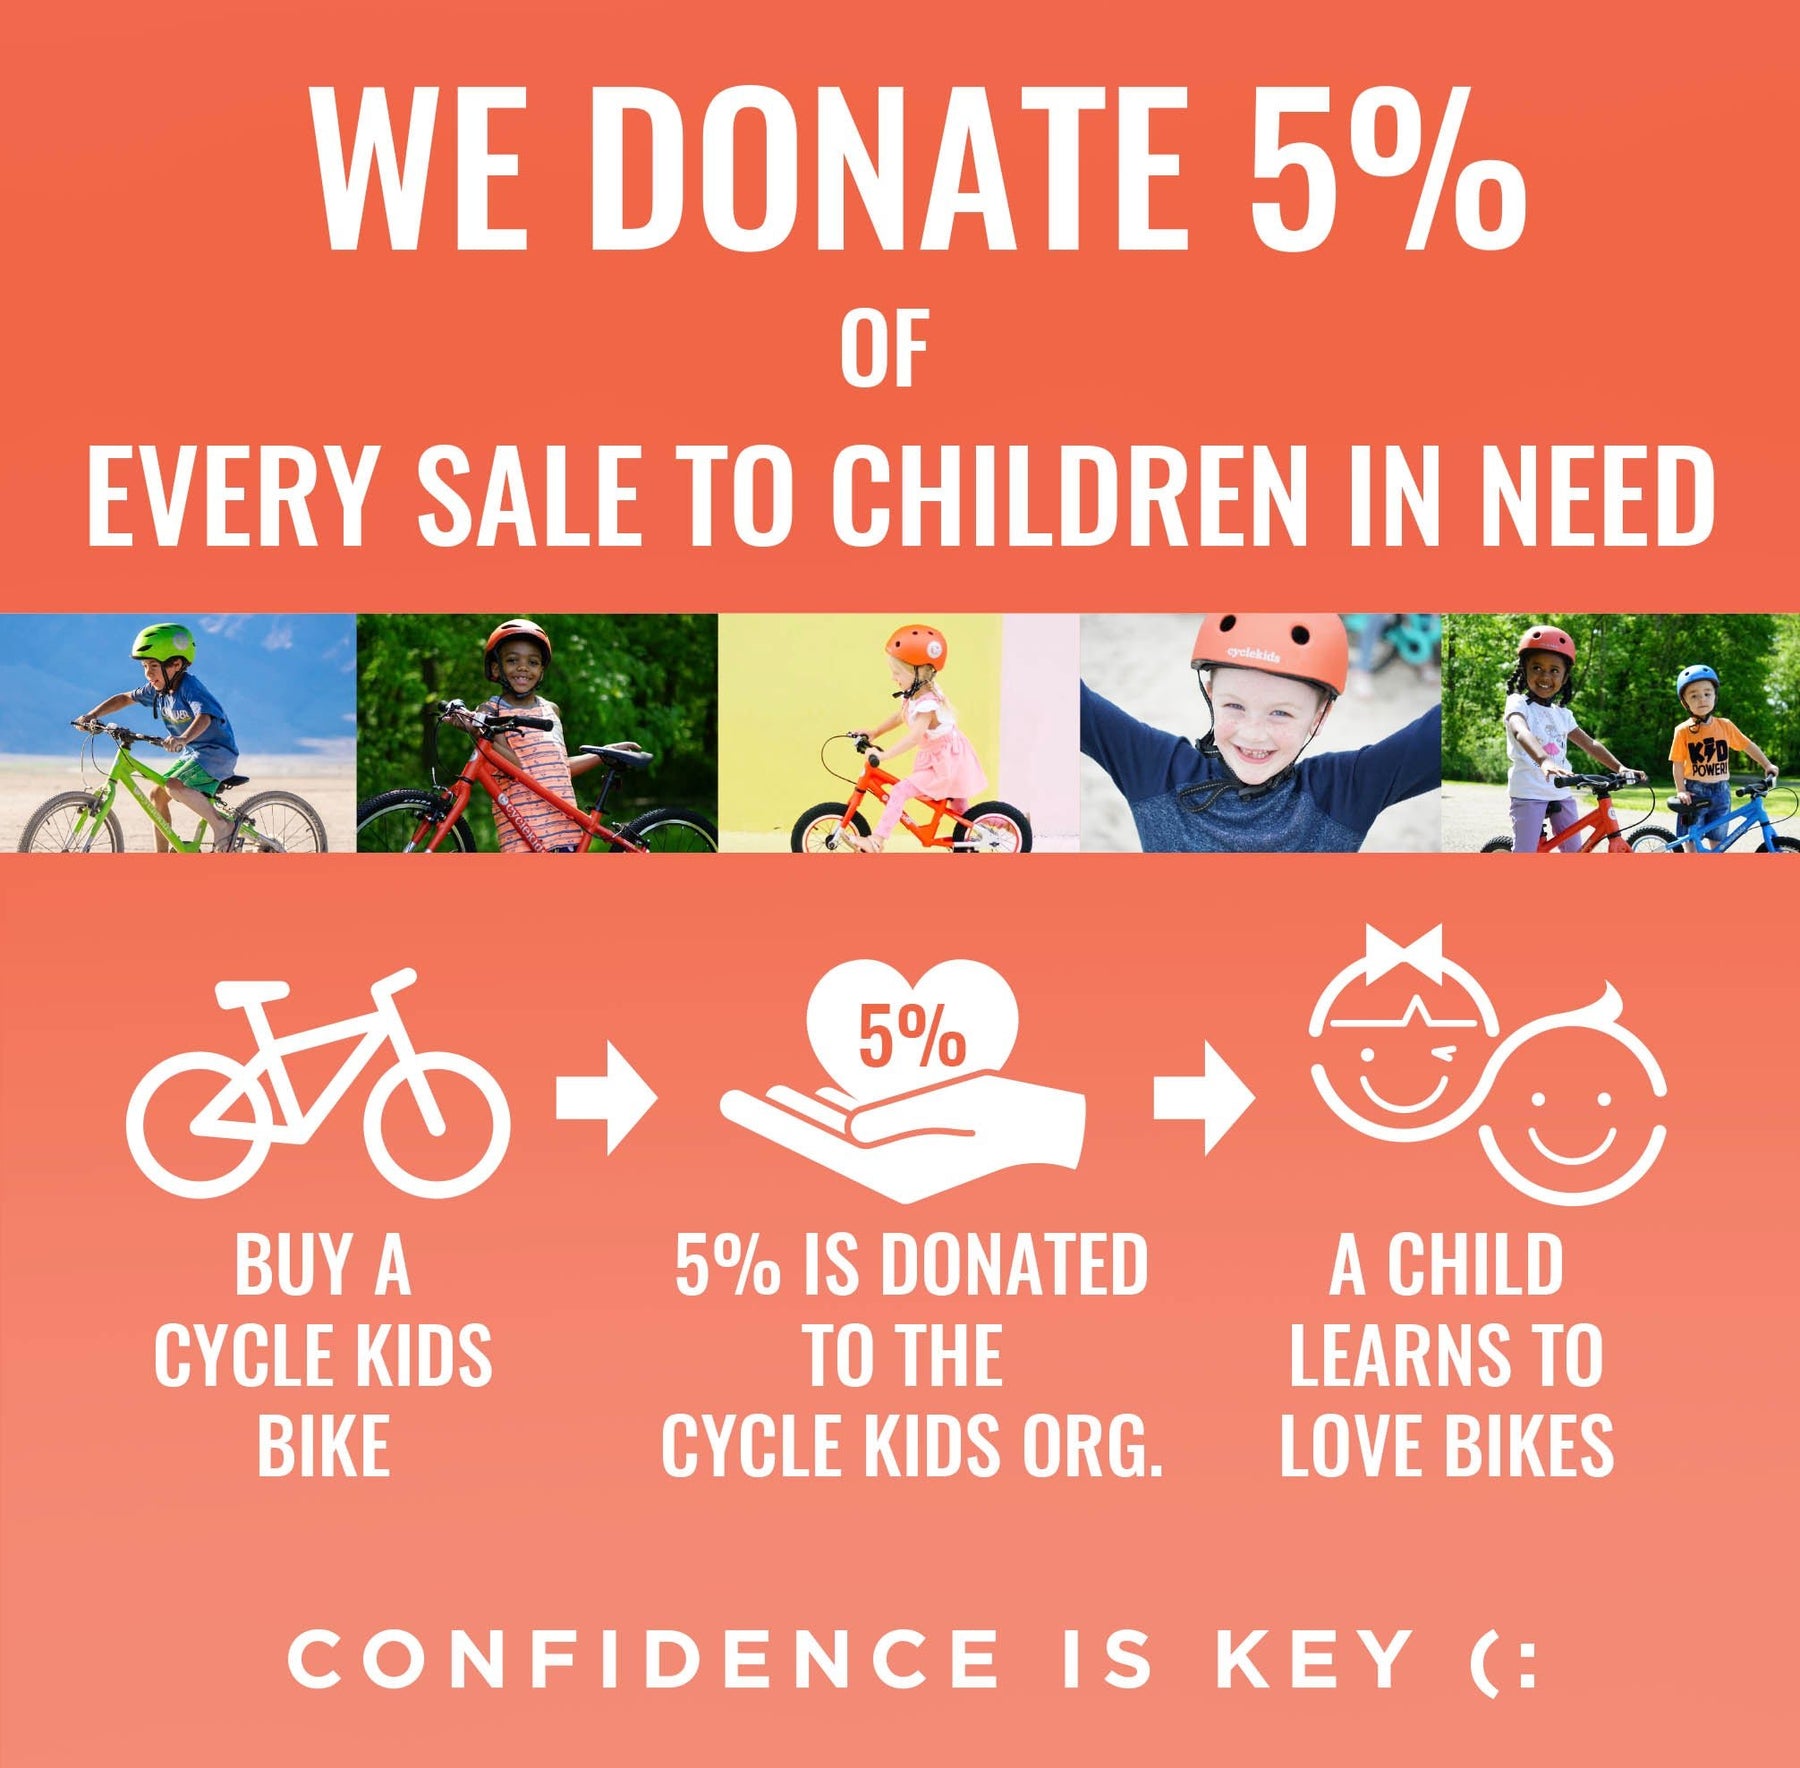 We donate 5% of every sale to children in need. Buy a CYCLE Kids bike > 5% is donated to the CYCLE Kids organization > A children learns to love bikes